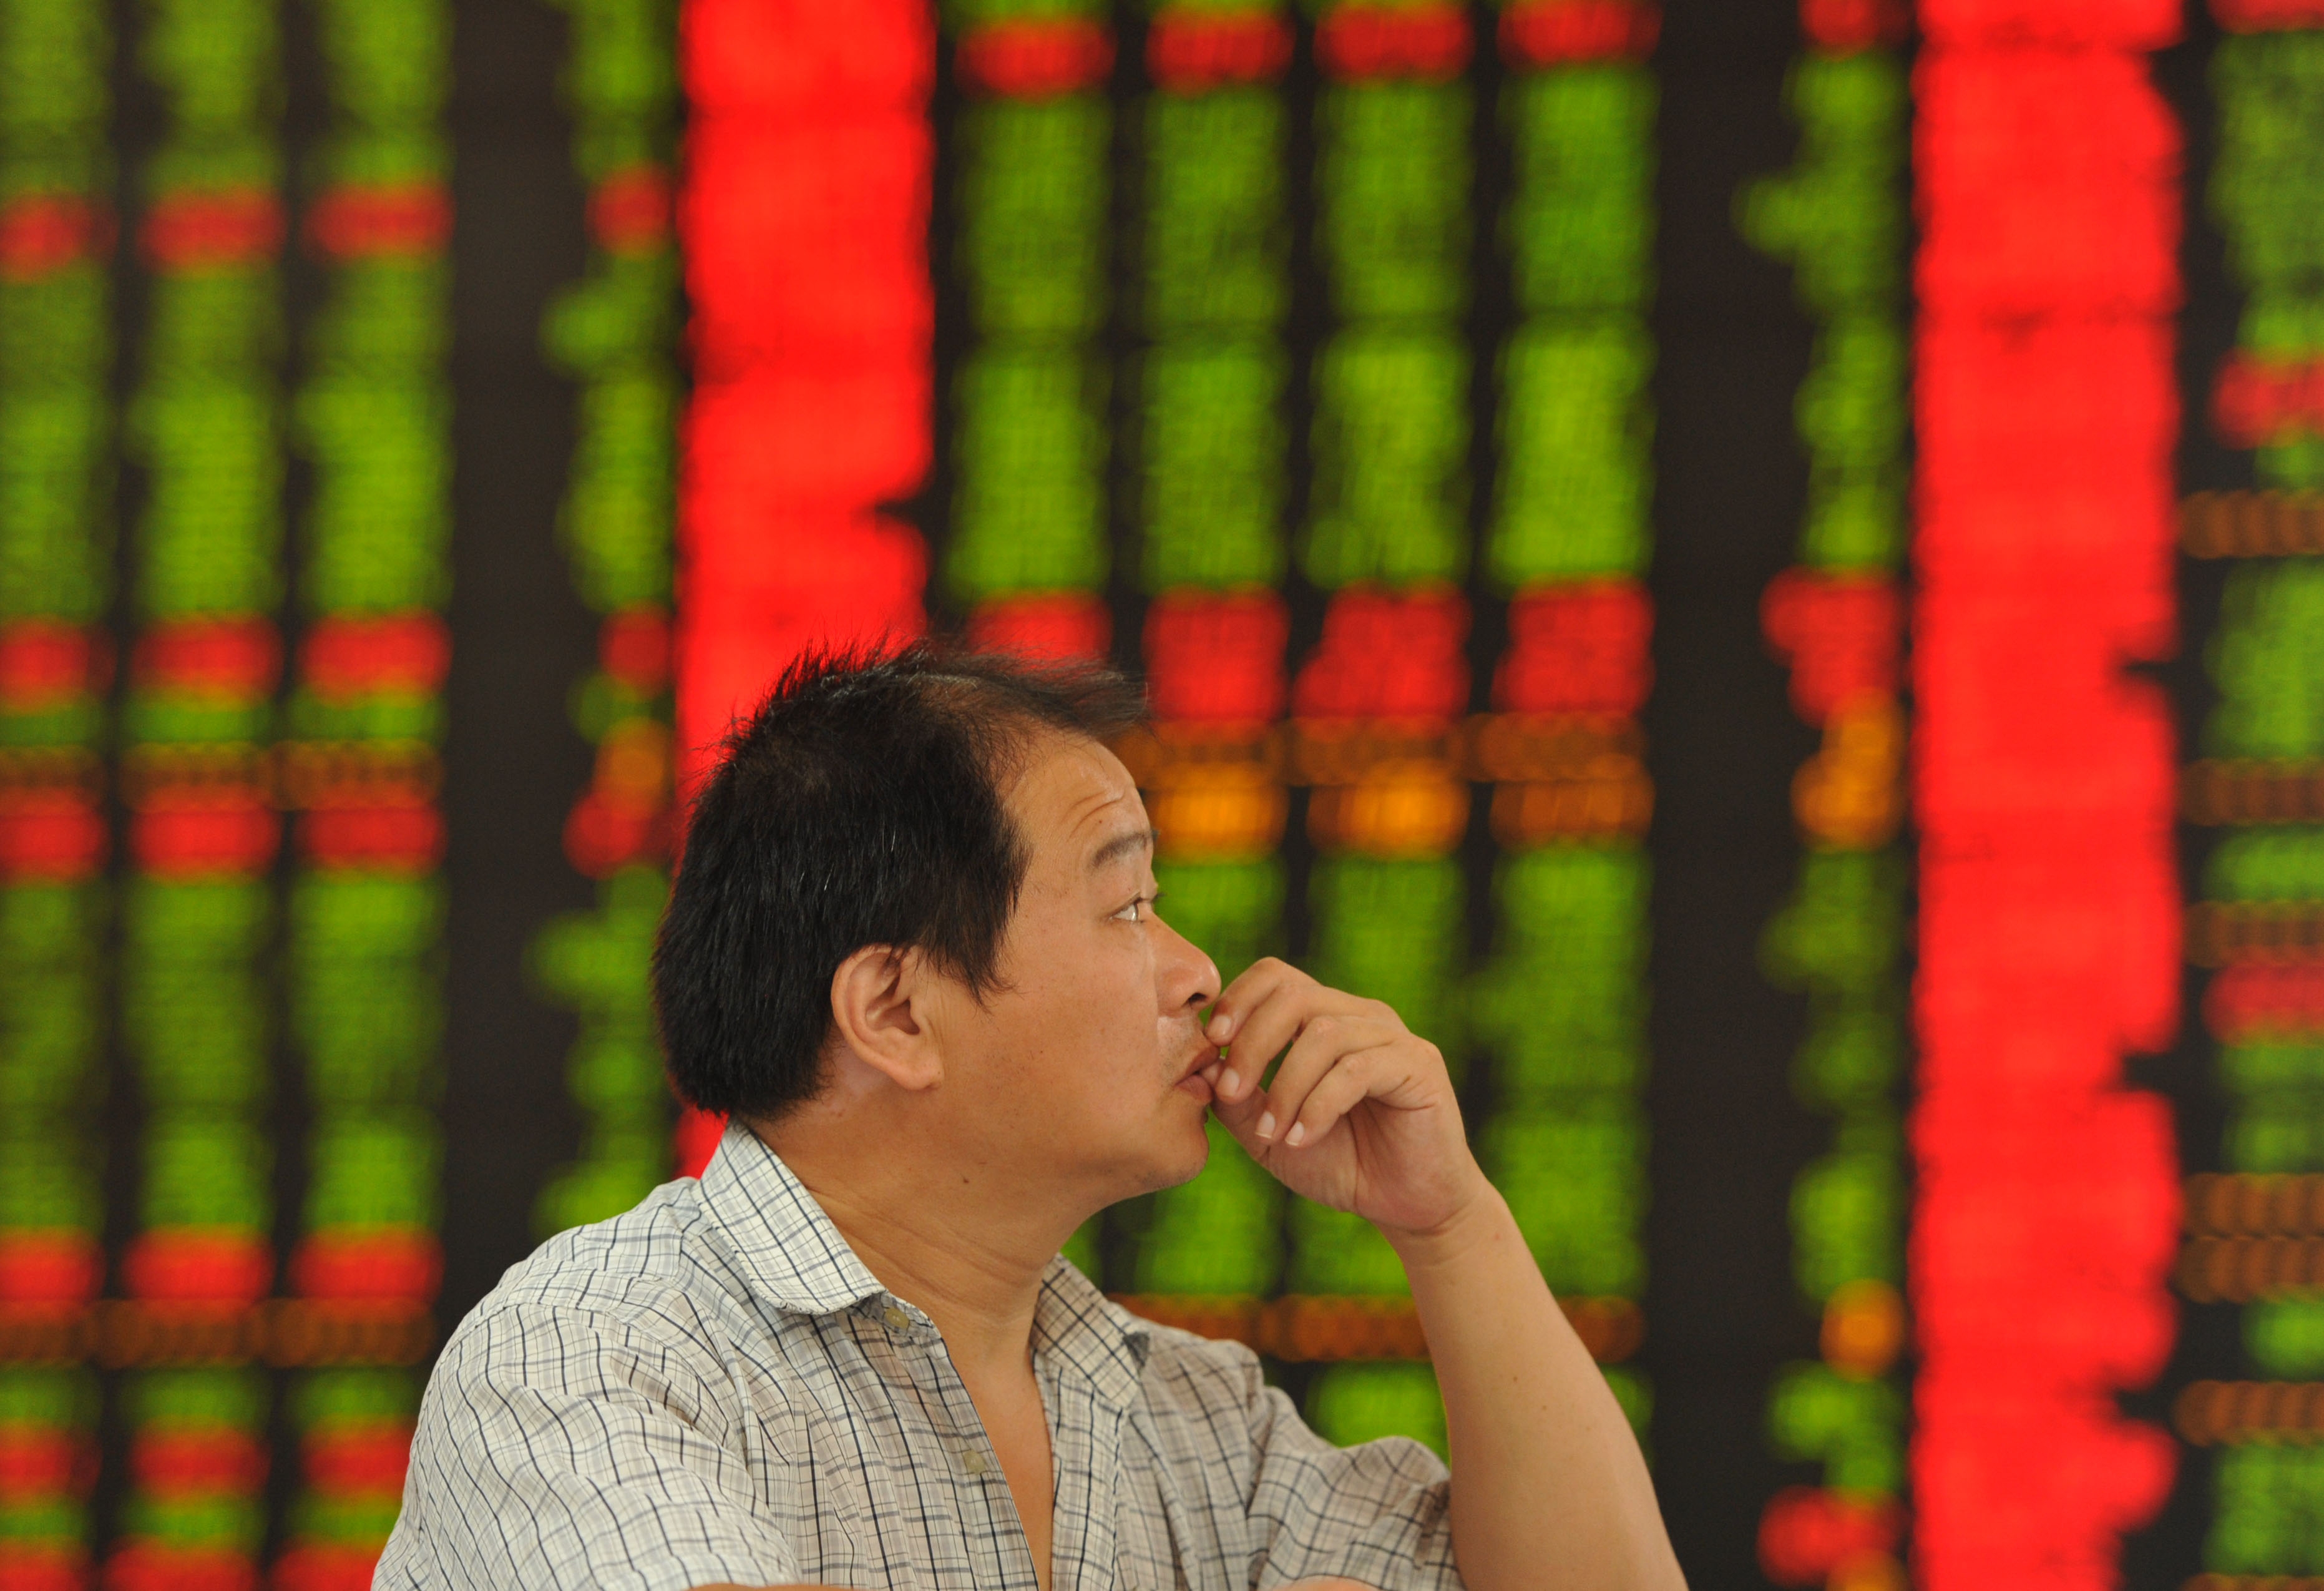 A concerned Chinese investor looks at prices of shares (red for price rising and green for price falling) at a Chinese stock brokerage house on August 5, 2015. (An xin—Imagechina/AP)